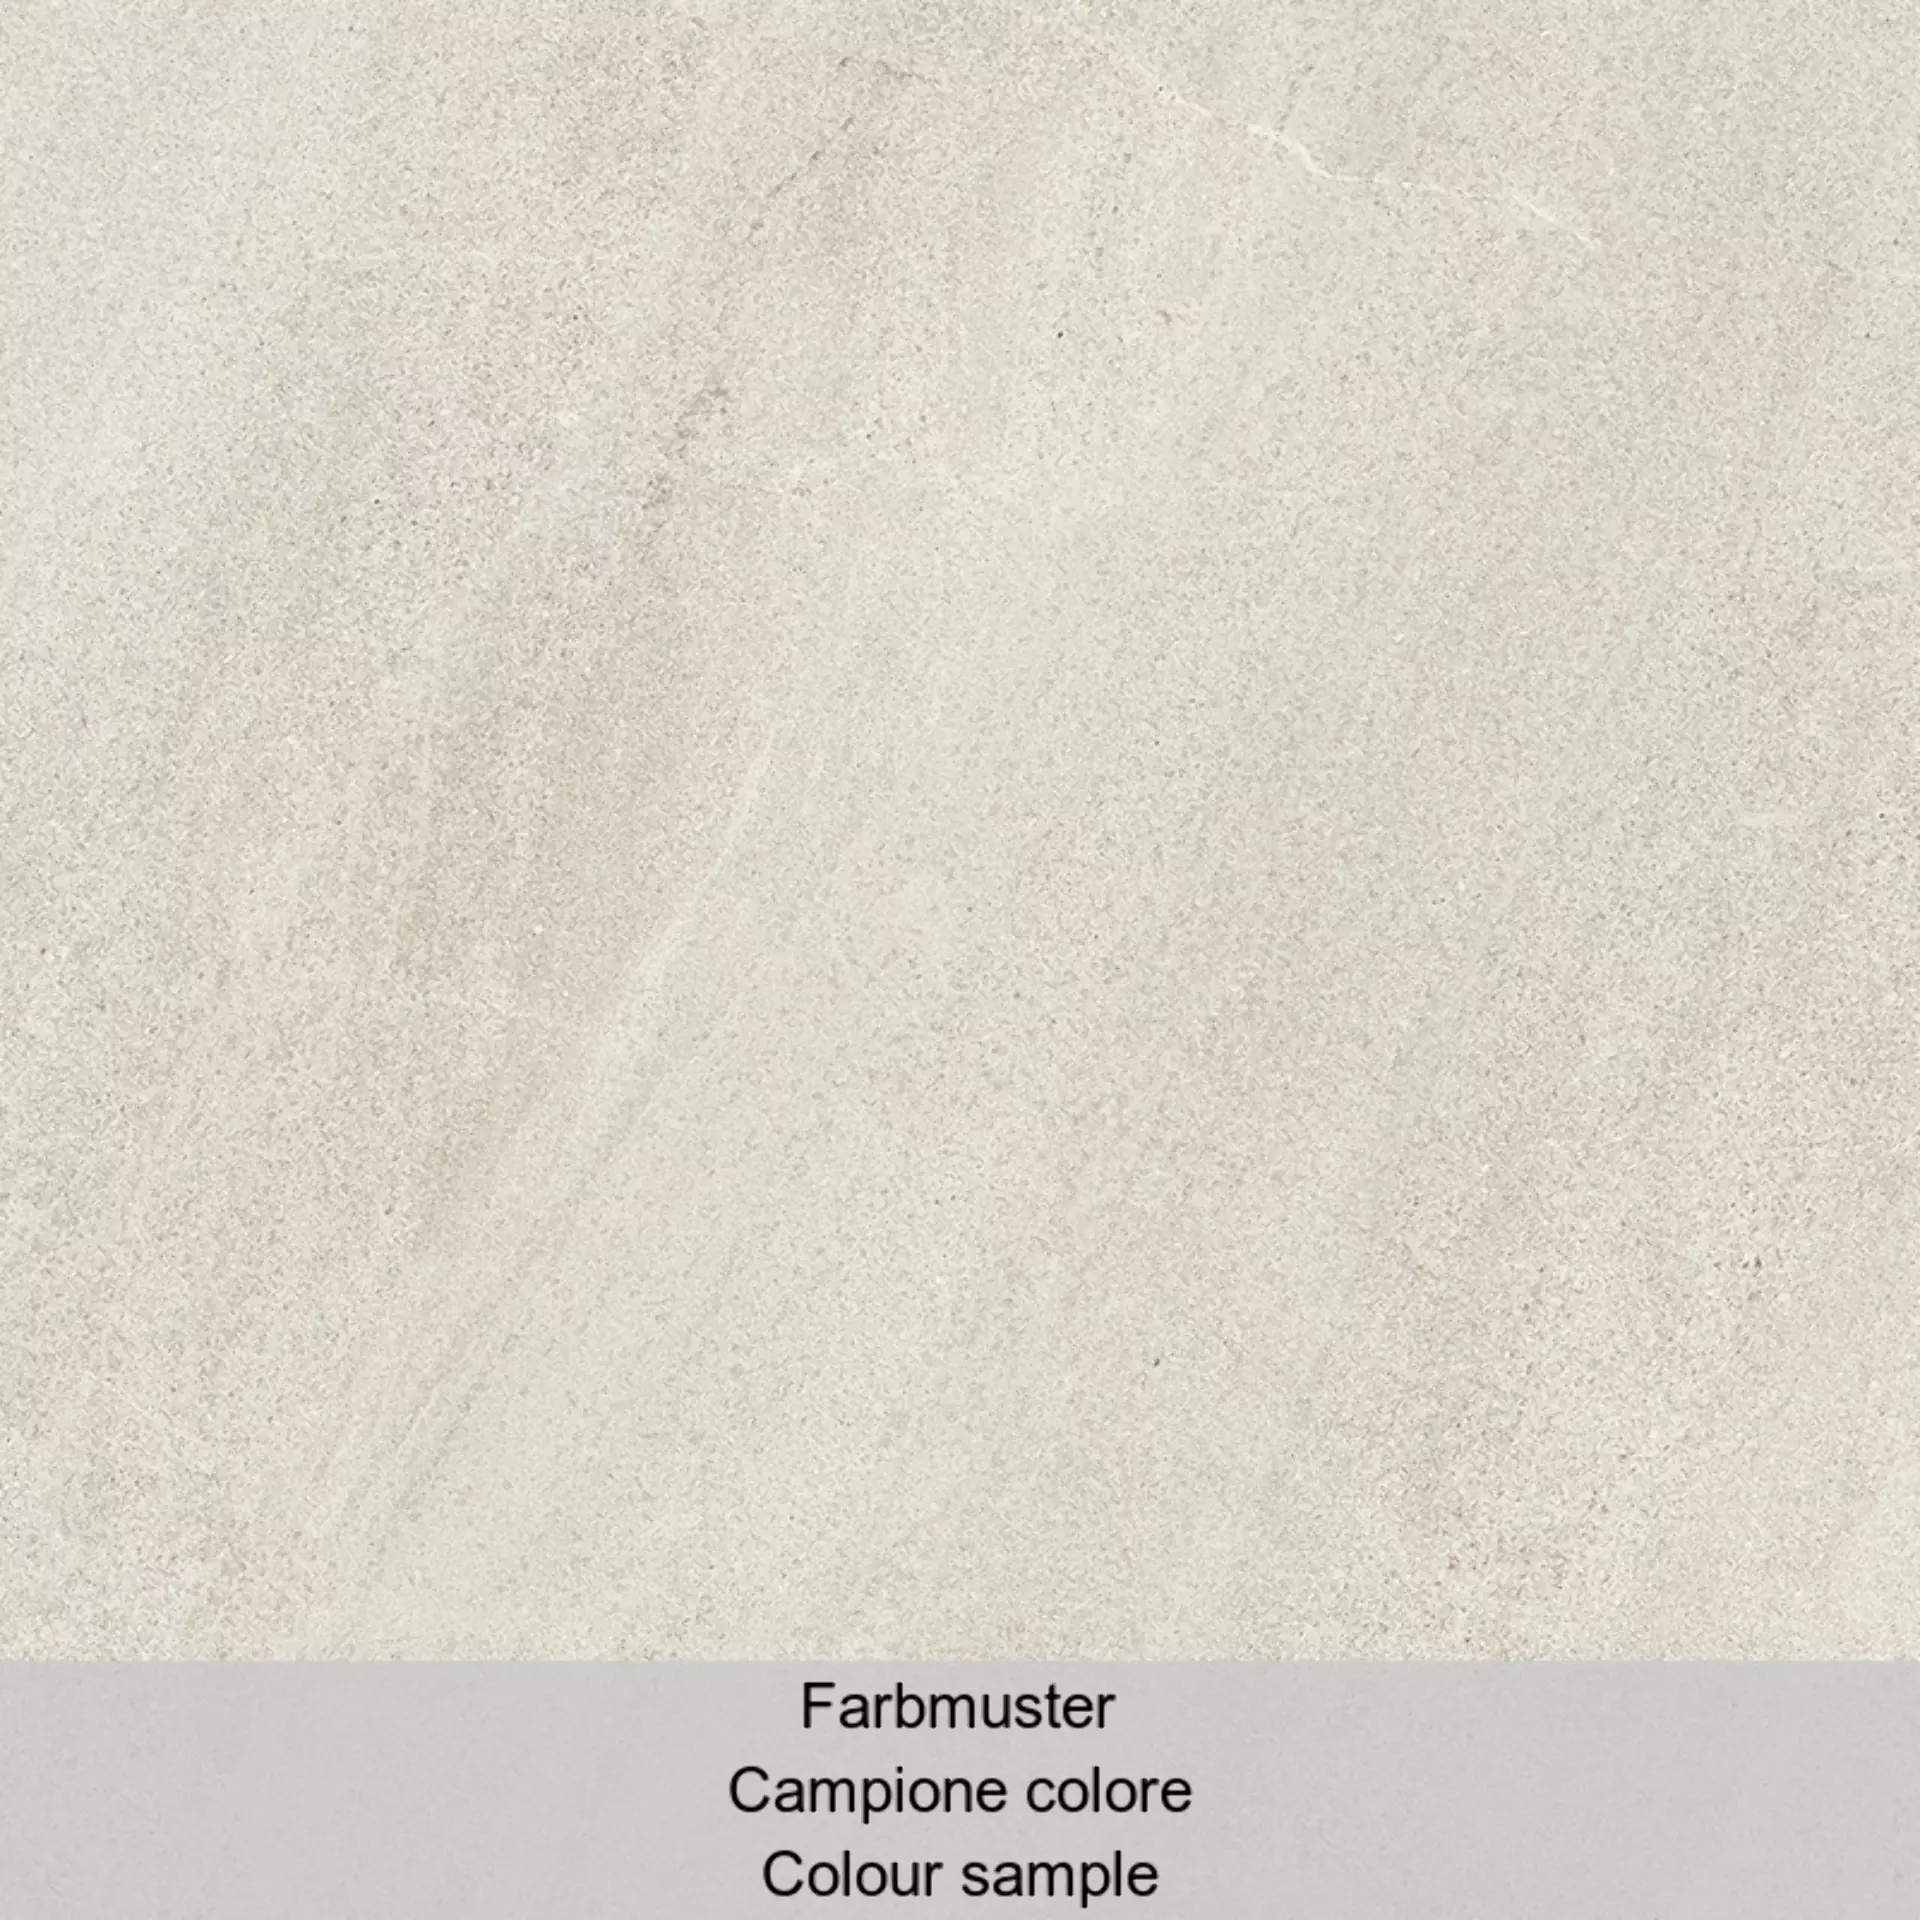 Cottodeste Limestone Clay Blazed Protect EGGLS91 90x90cm rectified 20mm